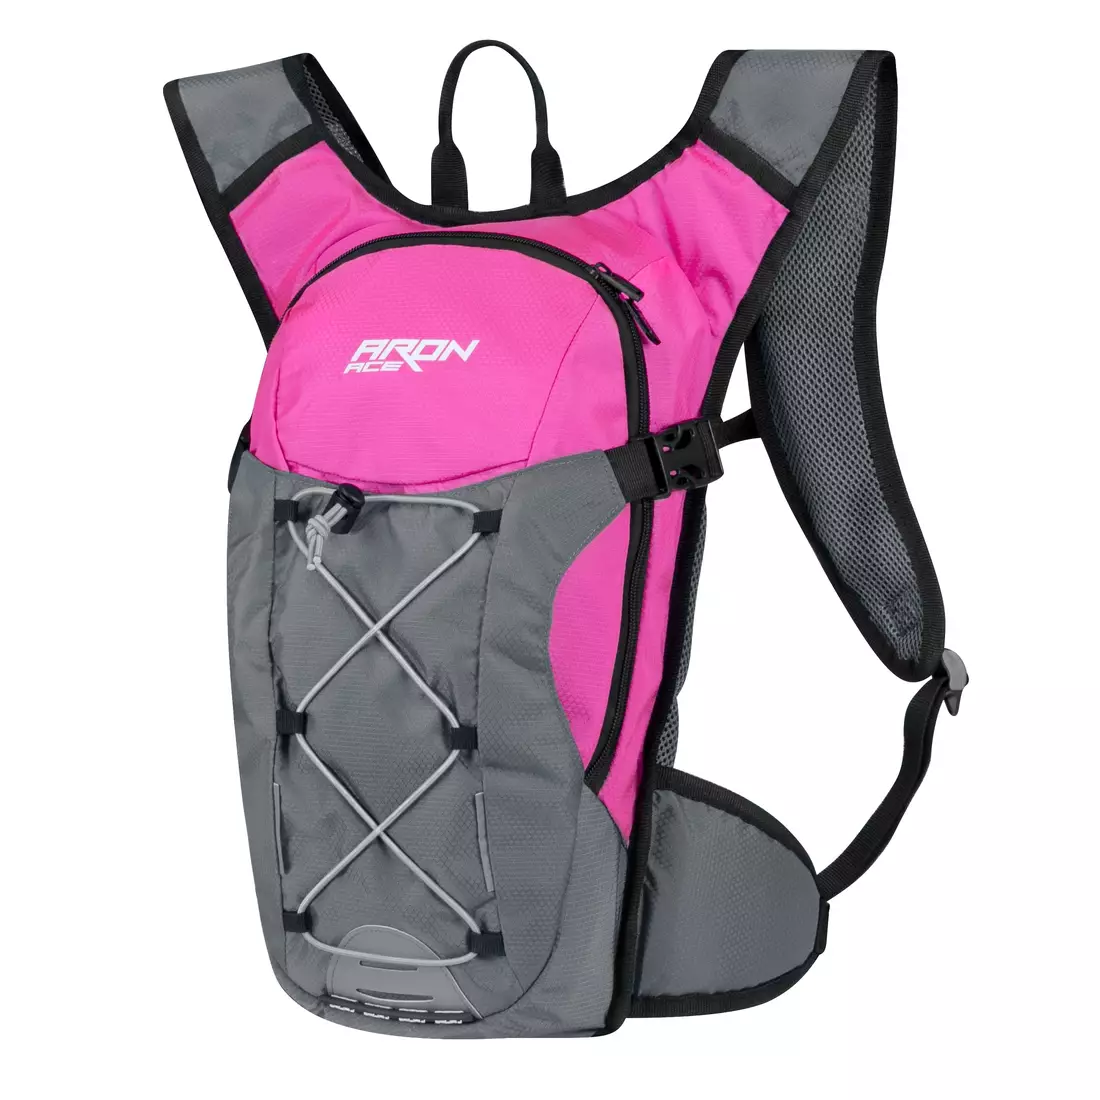 FORCE ARON ACE 10L bicycle backpack, pink-gray